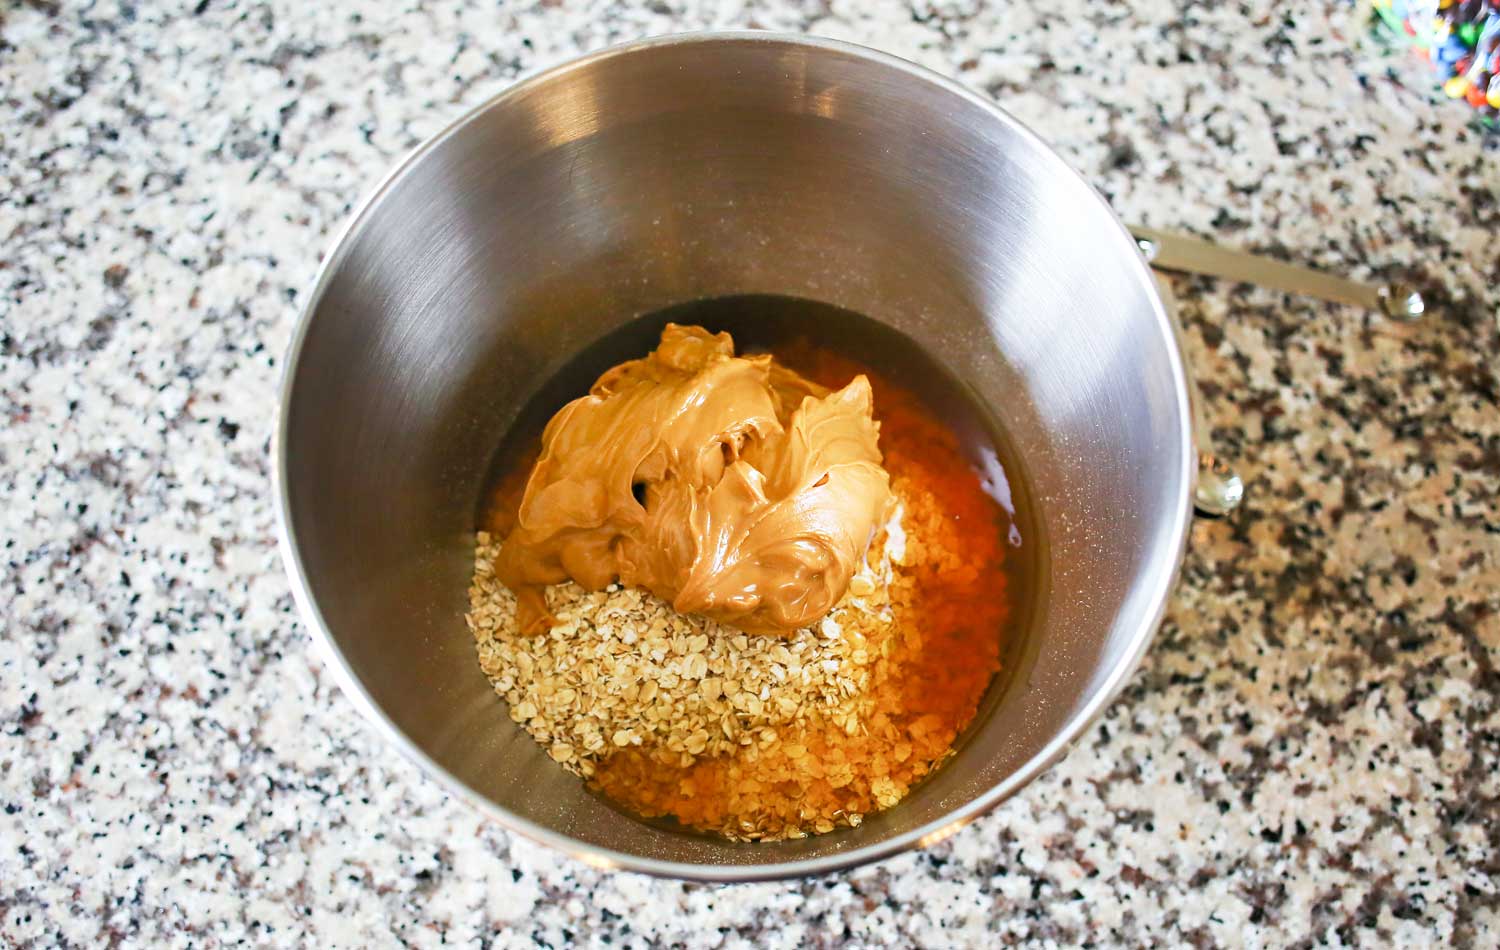 Combine the peanut butter, oats and vanilla in a mixing bowl. 